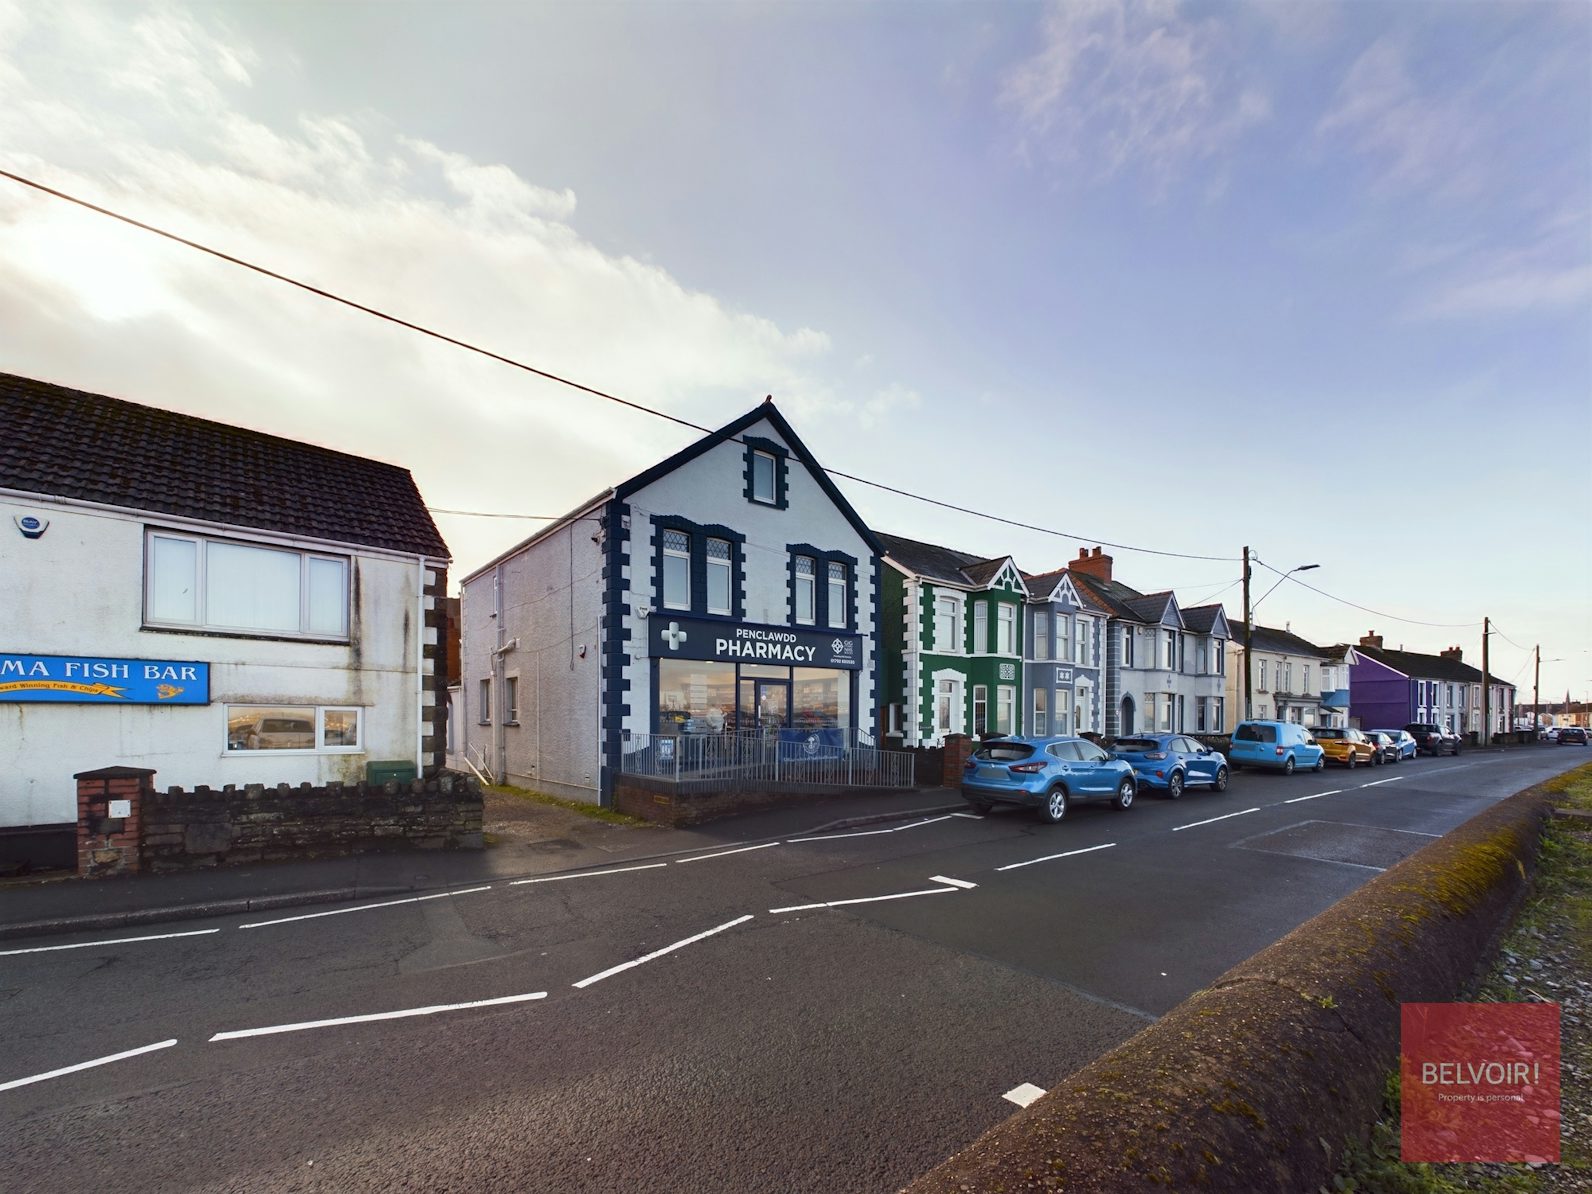 Maisonette to rent on The Pharmacy, Sea View Penclawdd, Swansea, SA4